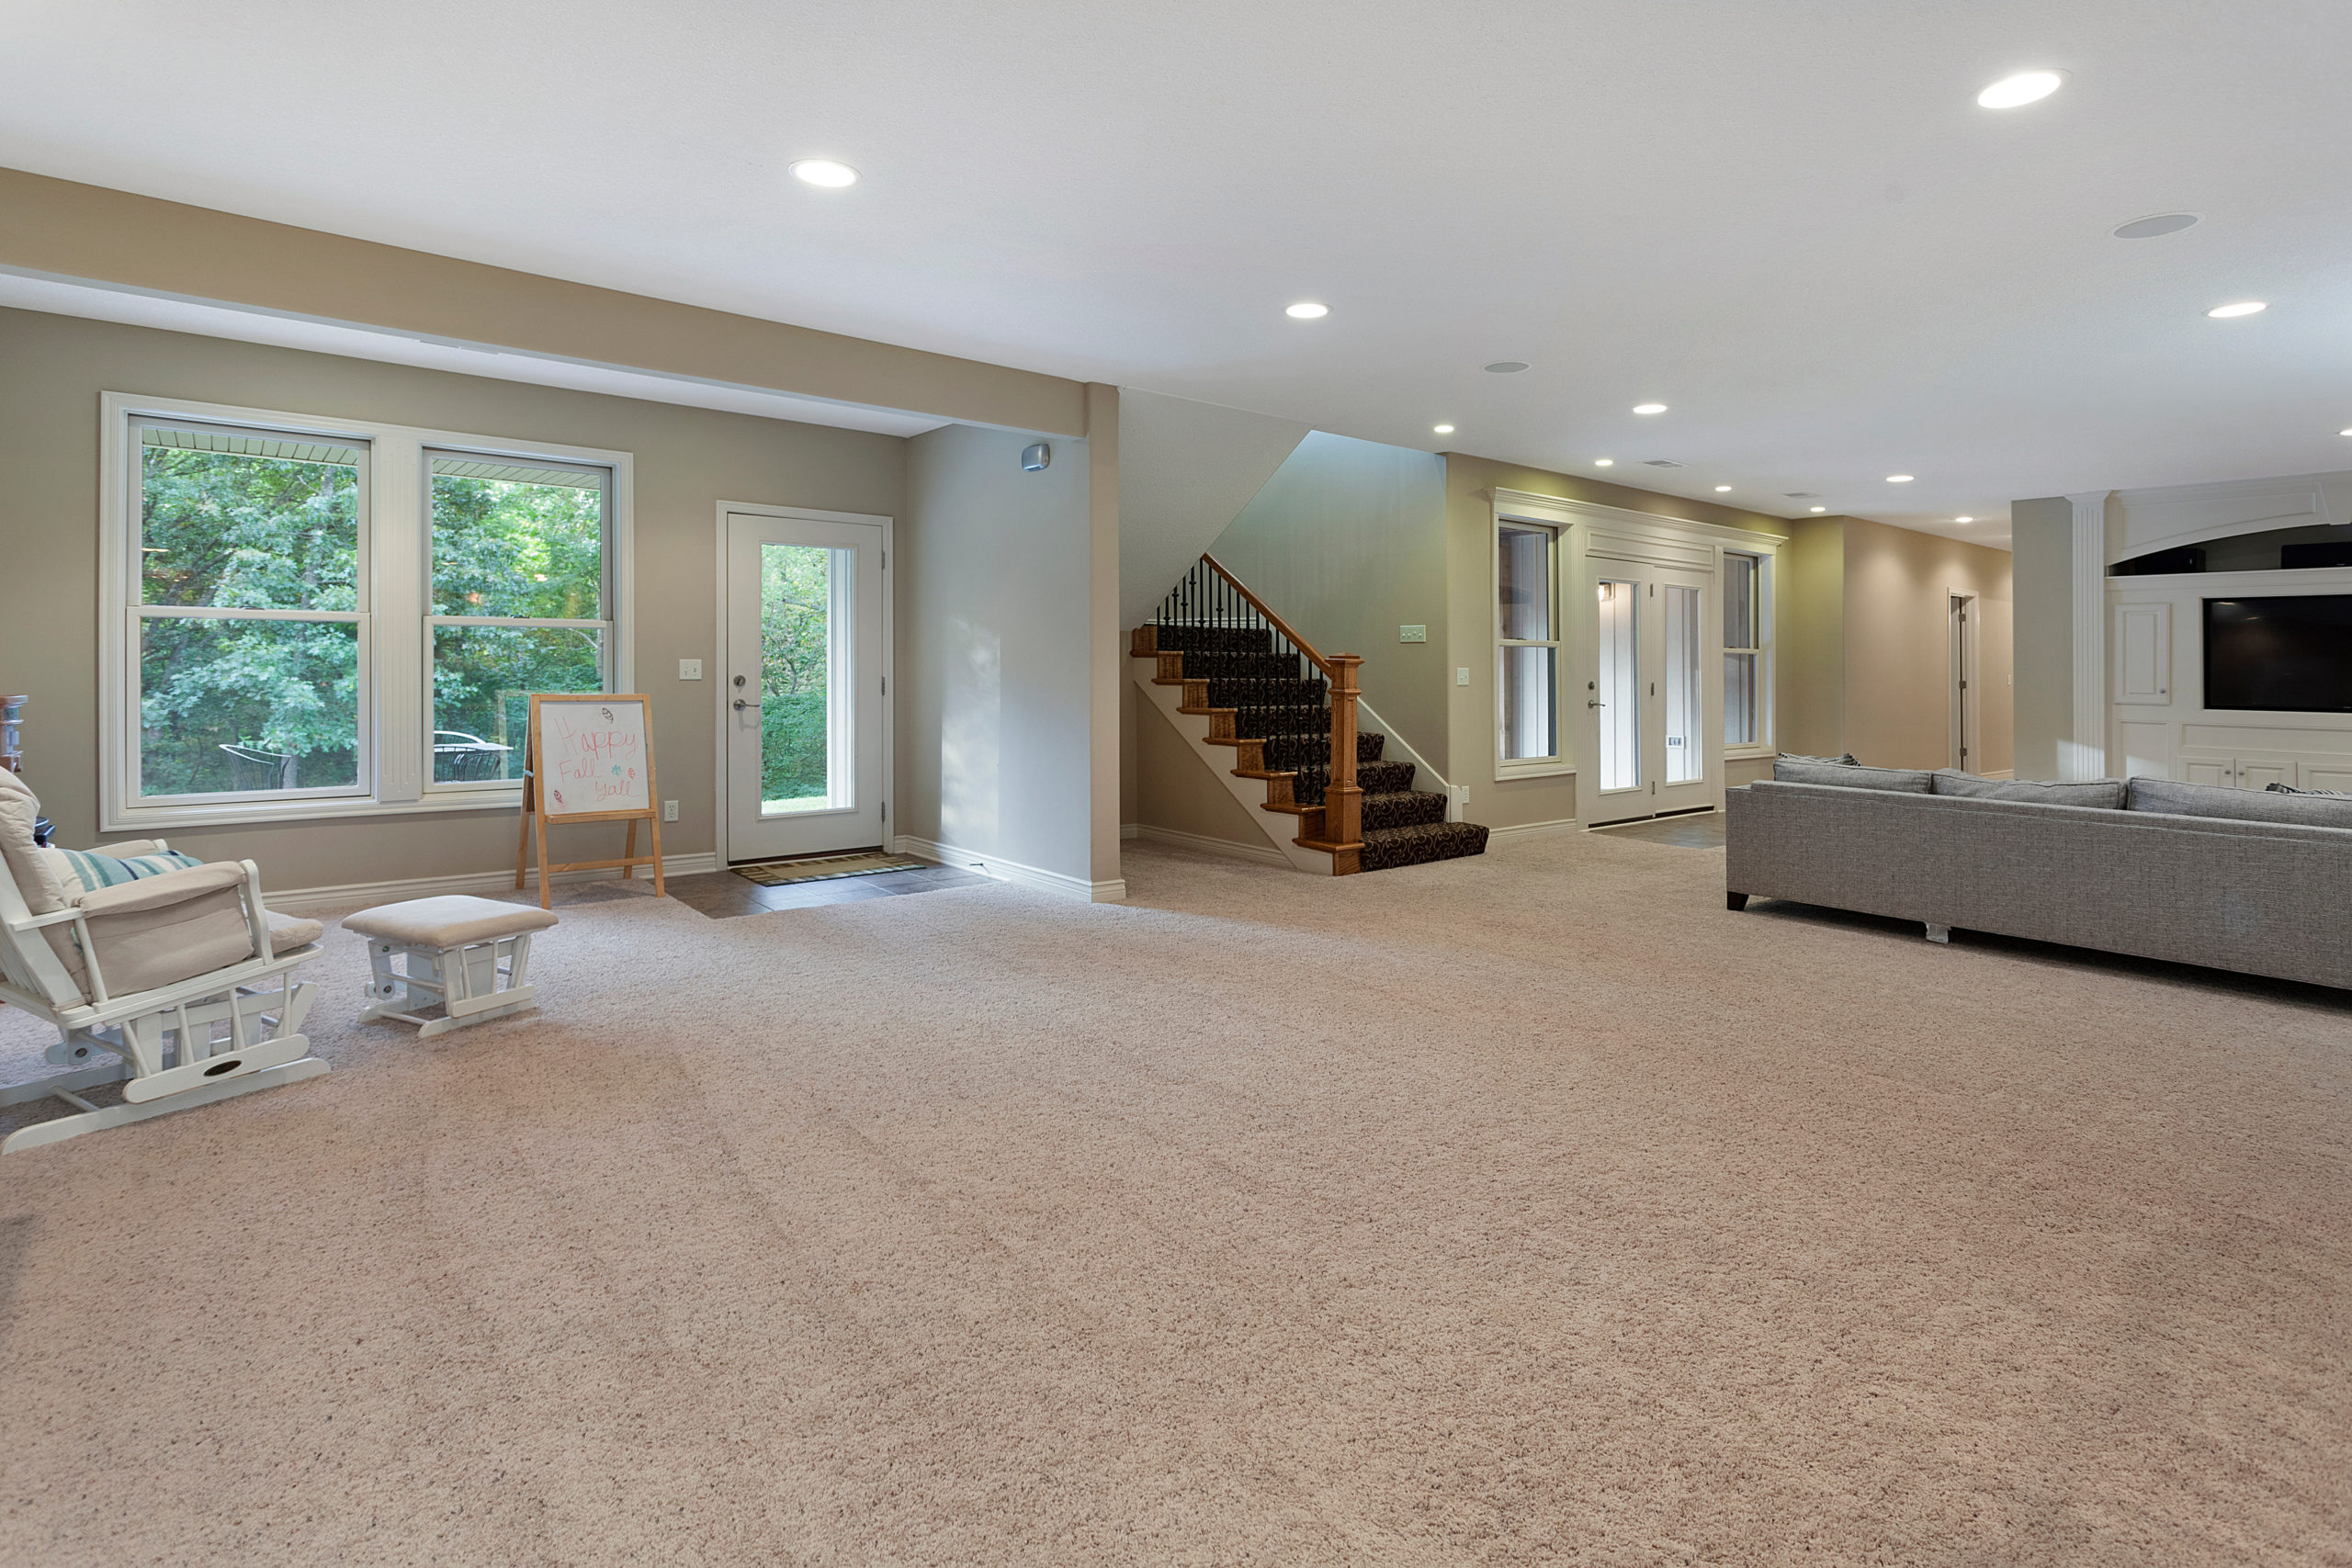 average cost to finish basement with quality finishes